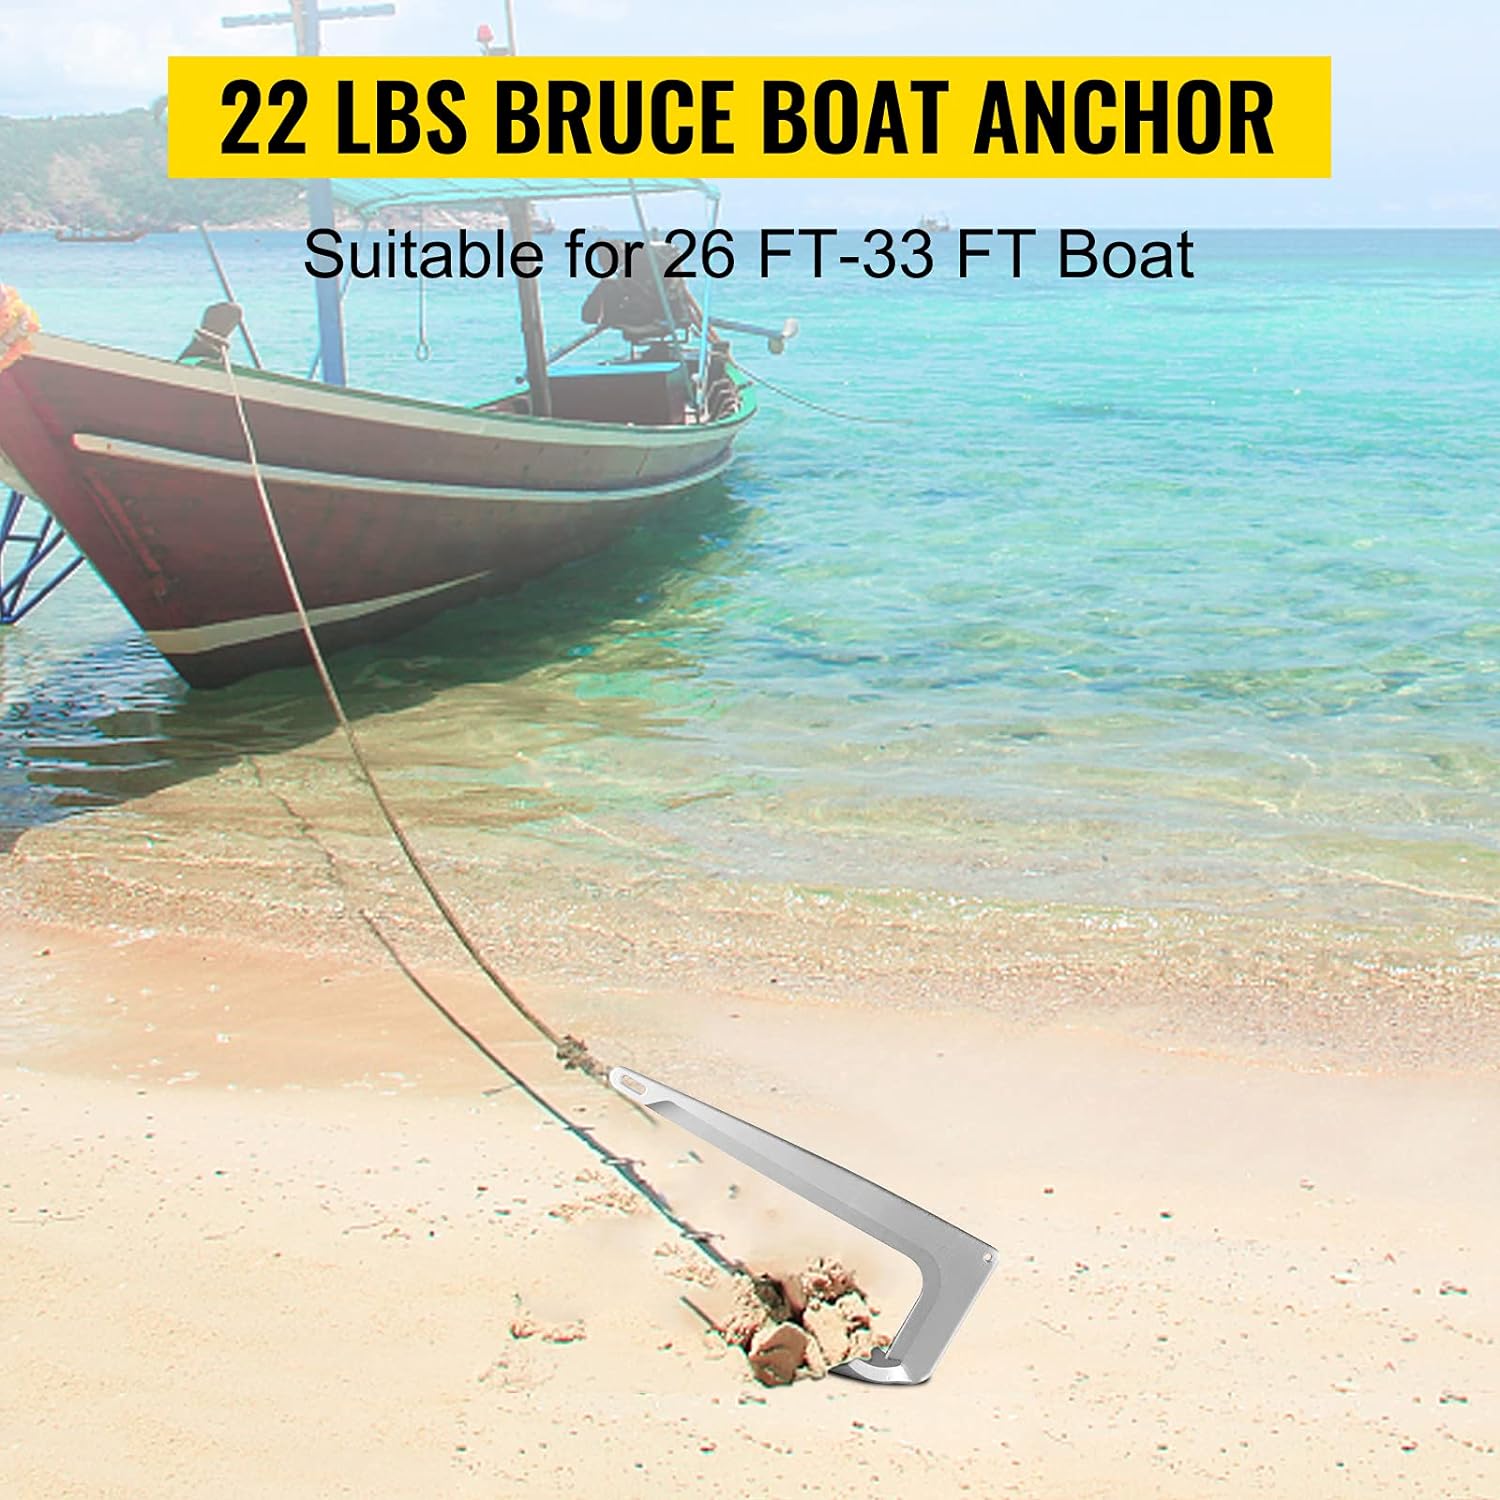 made to order for Yachts Fishing Boats Ribs Bruce type 7.5Kg Anchor Package 